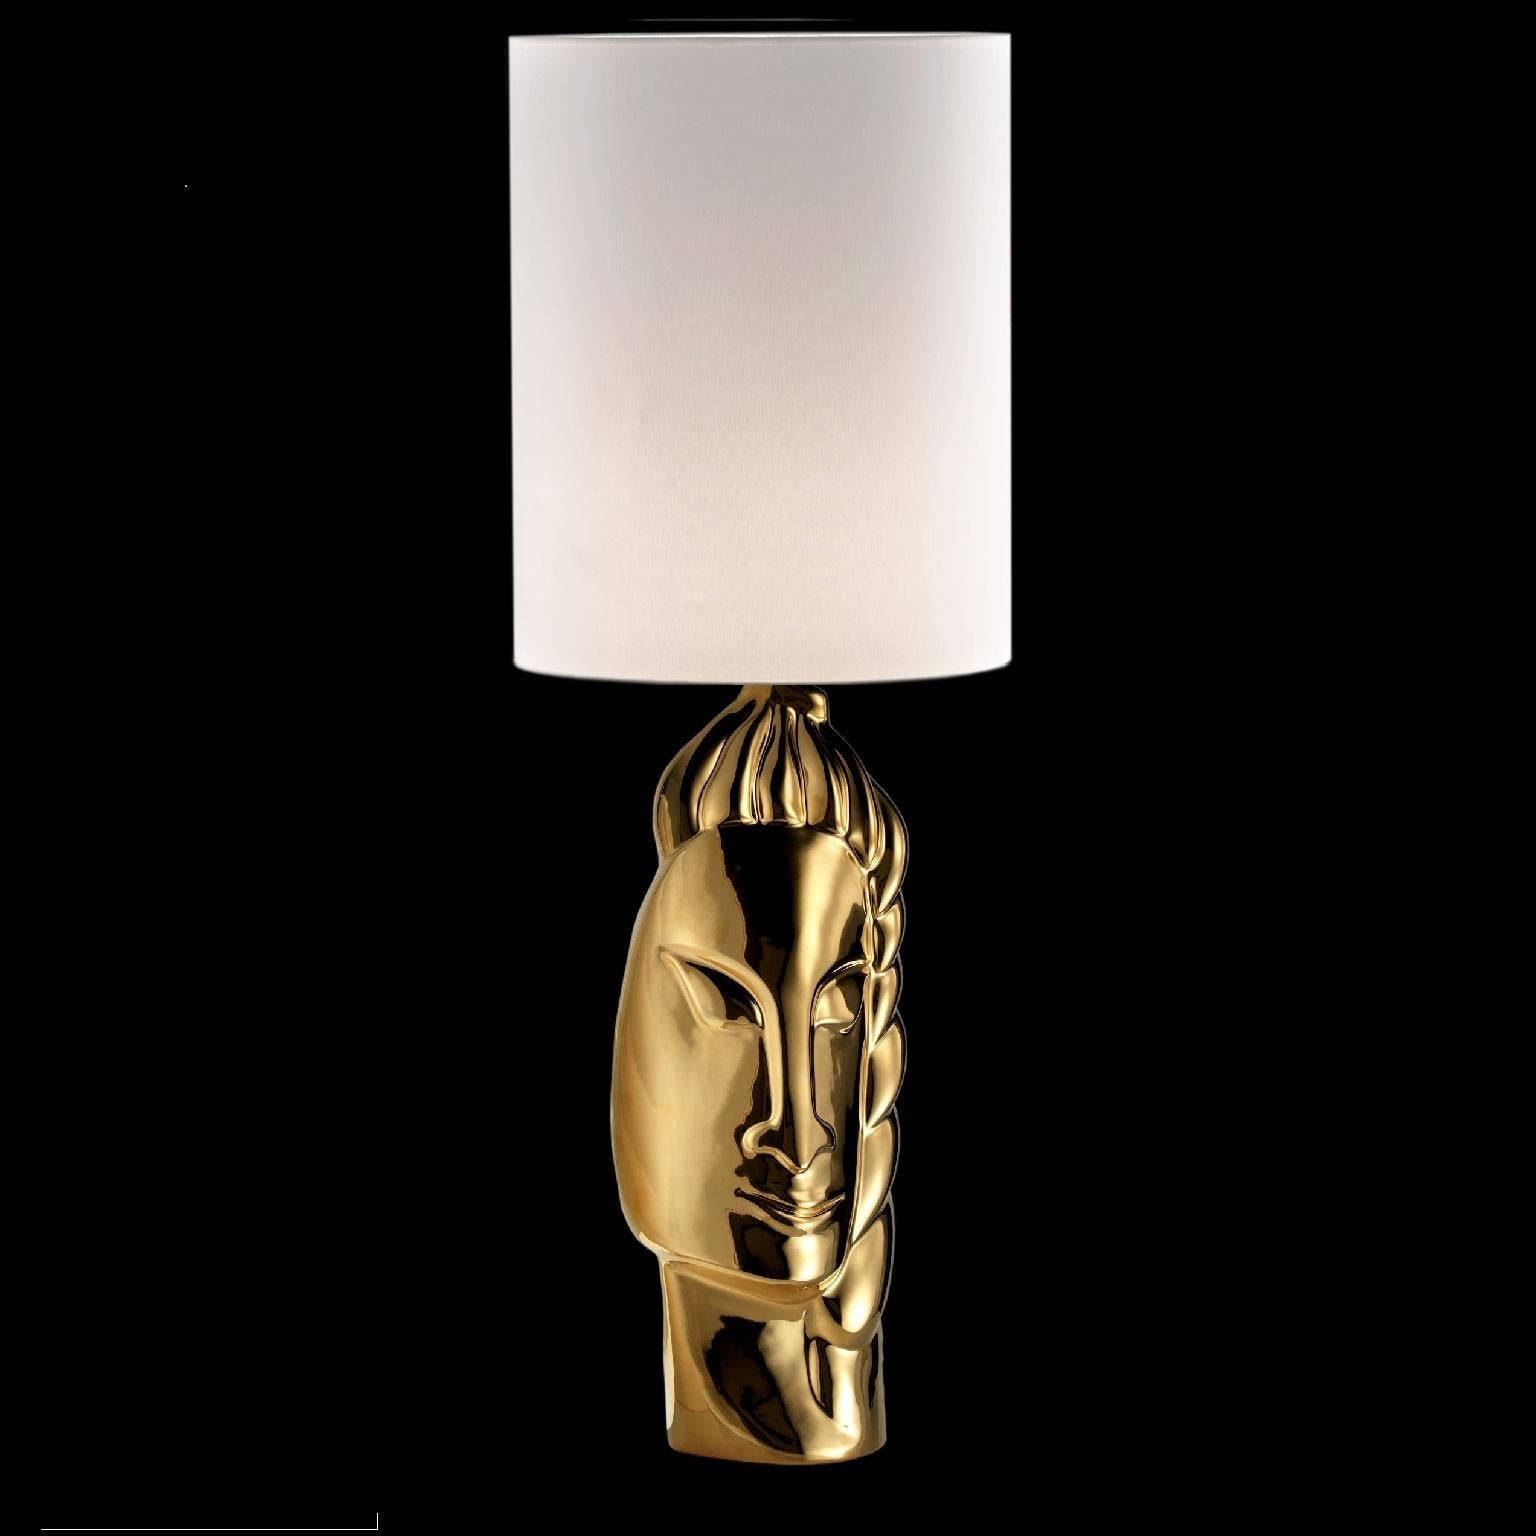 Hand-Crafted Cleta Lamp, Ceramic Lamp Handcrafted in Bronze For Sale